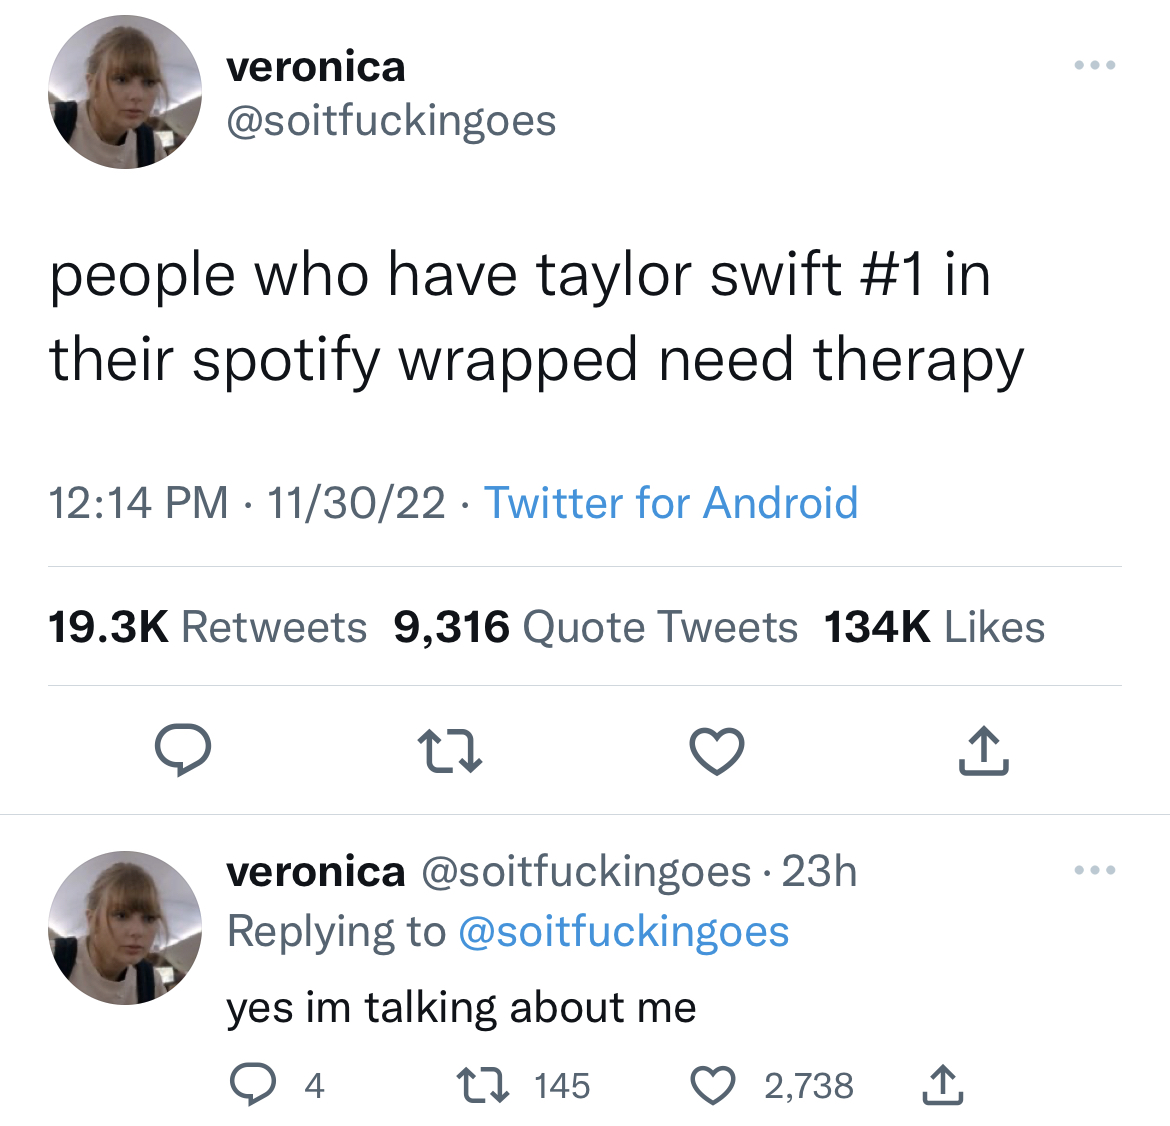 tweets roasting celebs - anti hero lyrics taylor swift - veronica people who have taylor swift in their spotify wrapped need therapy 113022 Twitter for Android 9,316 Quote Tweets 27 1 veronica 23h yes im talking about me 4 145 2,738